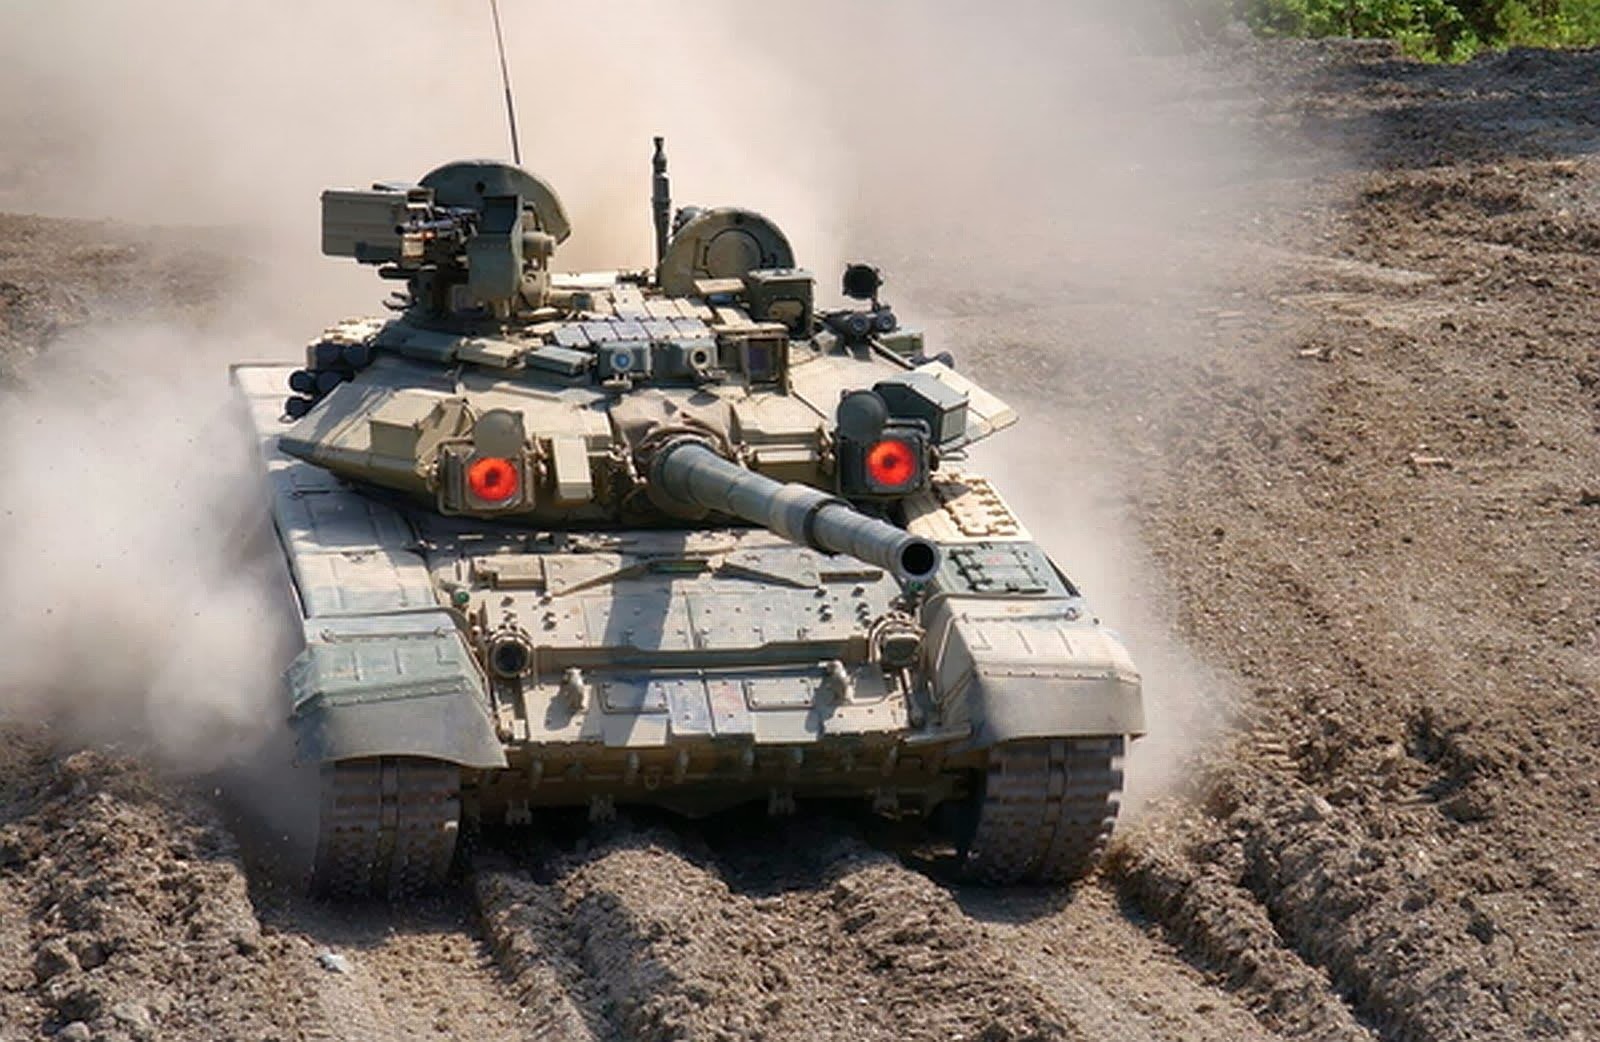 Why are T-72 main battle tanks appearing on the Russian-Ukrainian battlefield, but the more advanced T90 rarely shows up?